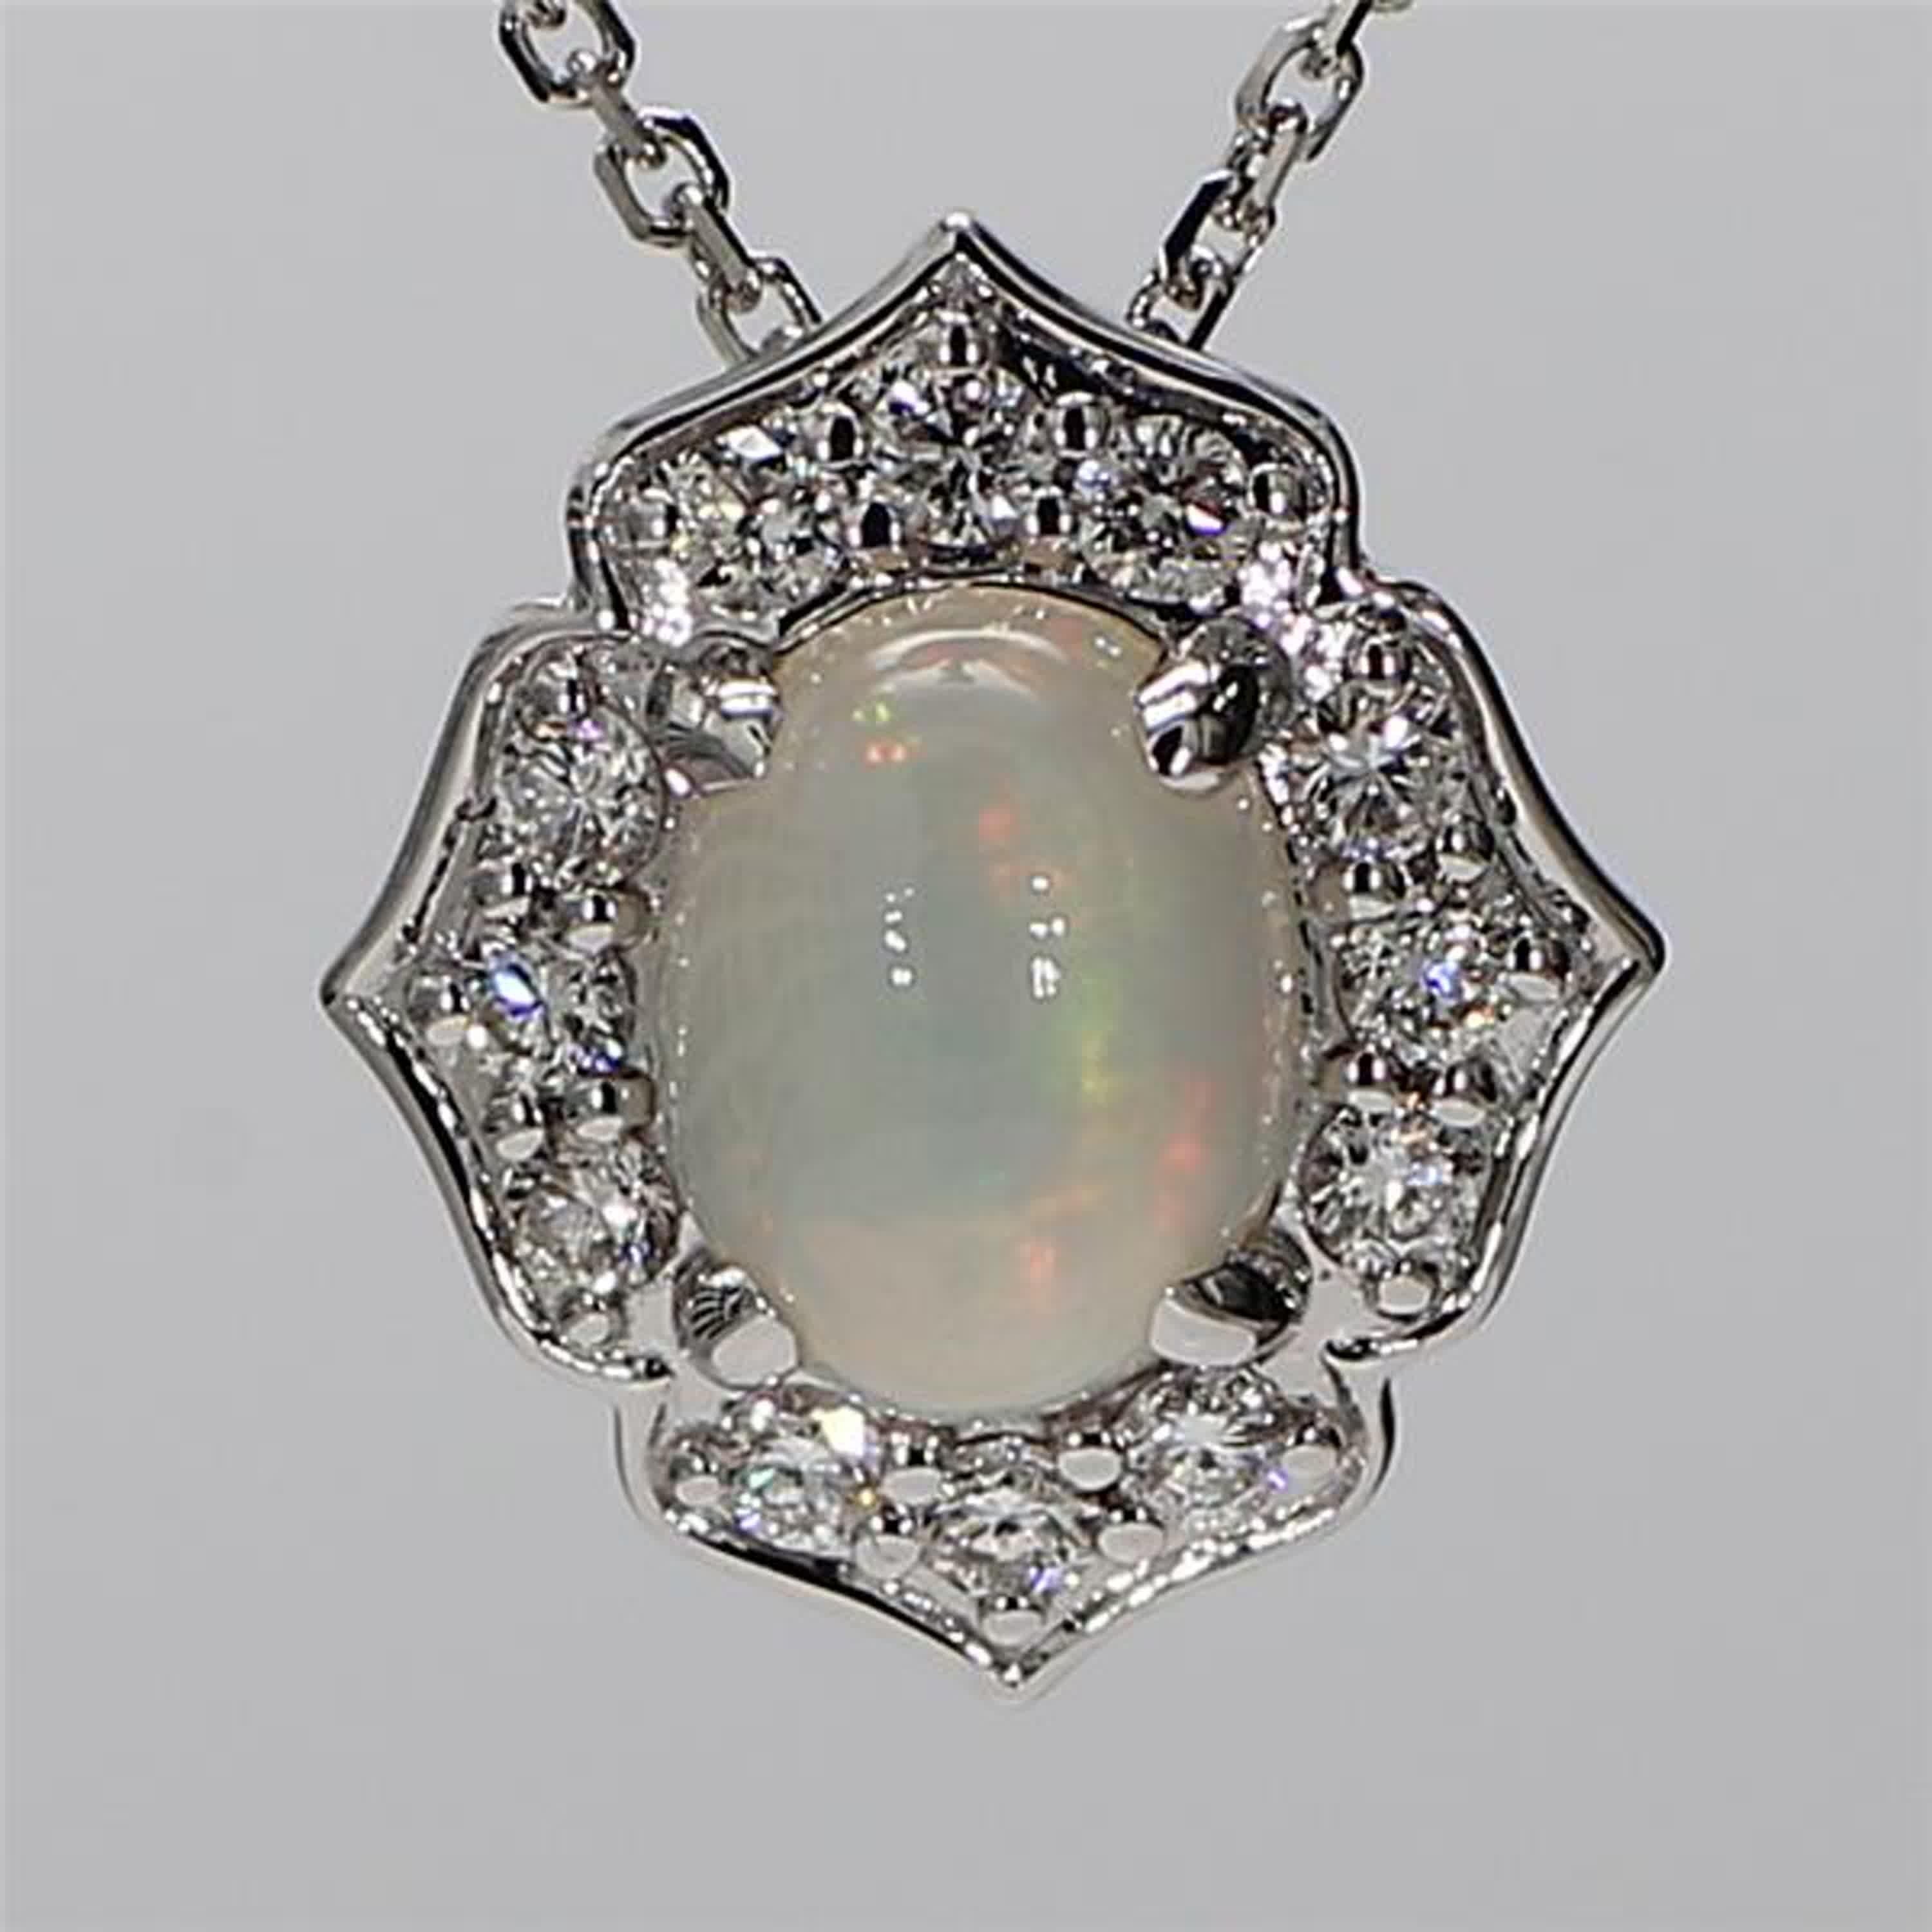 RareGemWorld's classic opal pendant. Mounted in a beautiful 18K White Gold setting with a natural oval cut opal. The opal is surrounded by natural round white diamond melee. This pendant is guaranteed to impress and enhance your personal